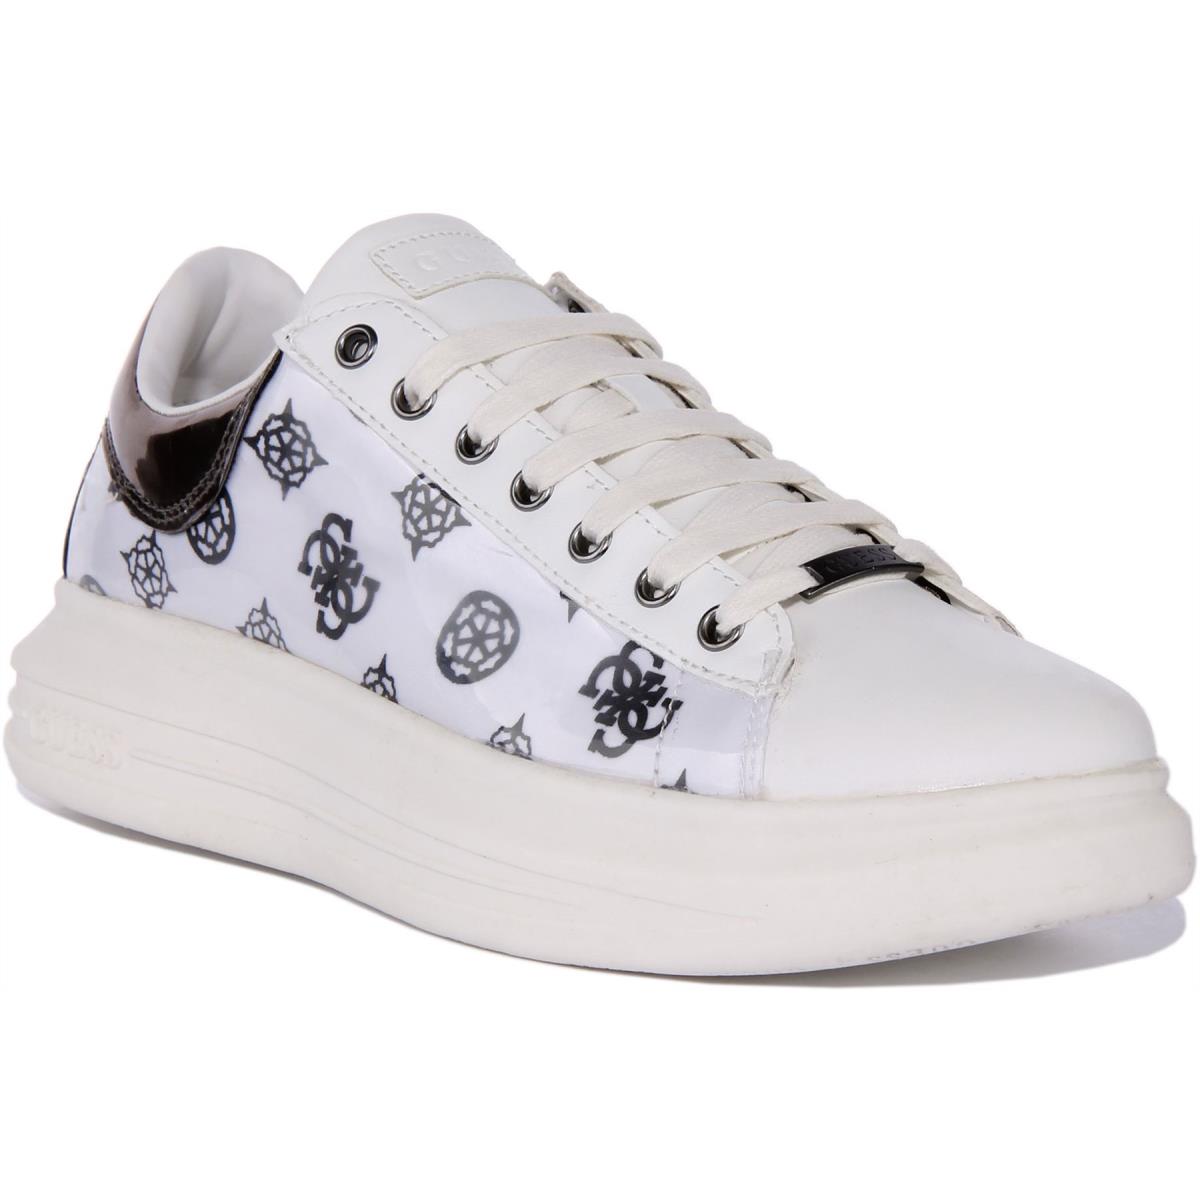 Guess Fl5Vibfab12 Vibo Womens Lace Up Sneakers In White Bronze Size US 5 - 11 WHITE SILVER